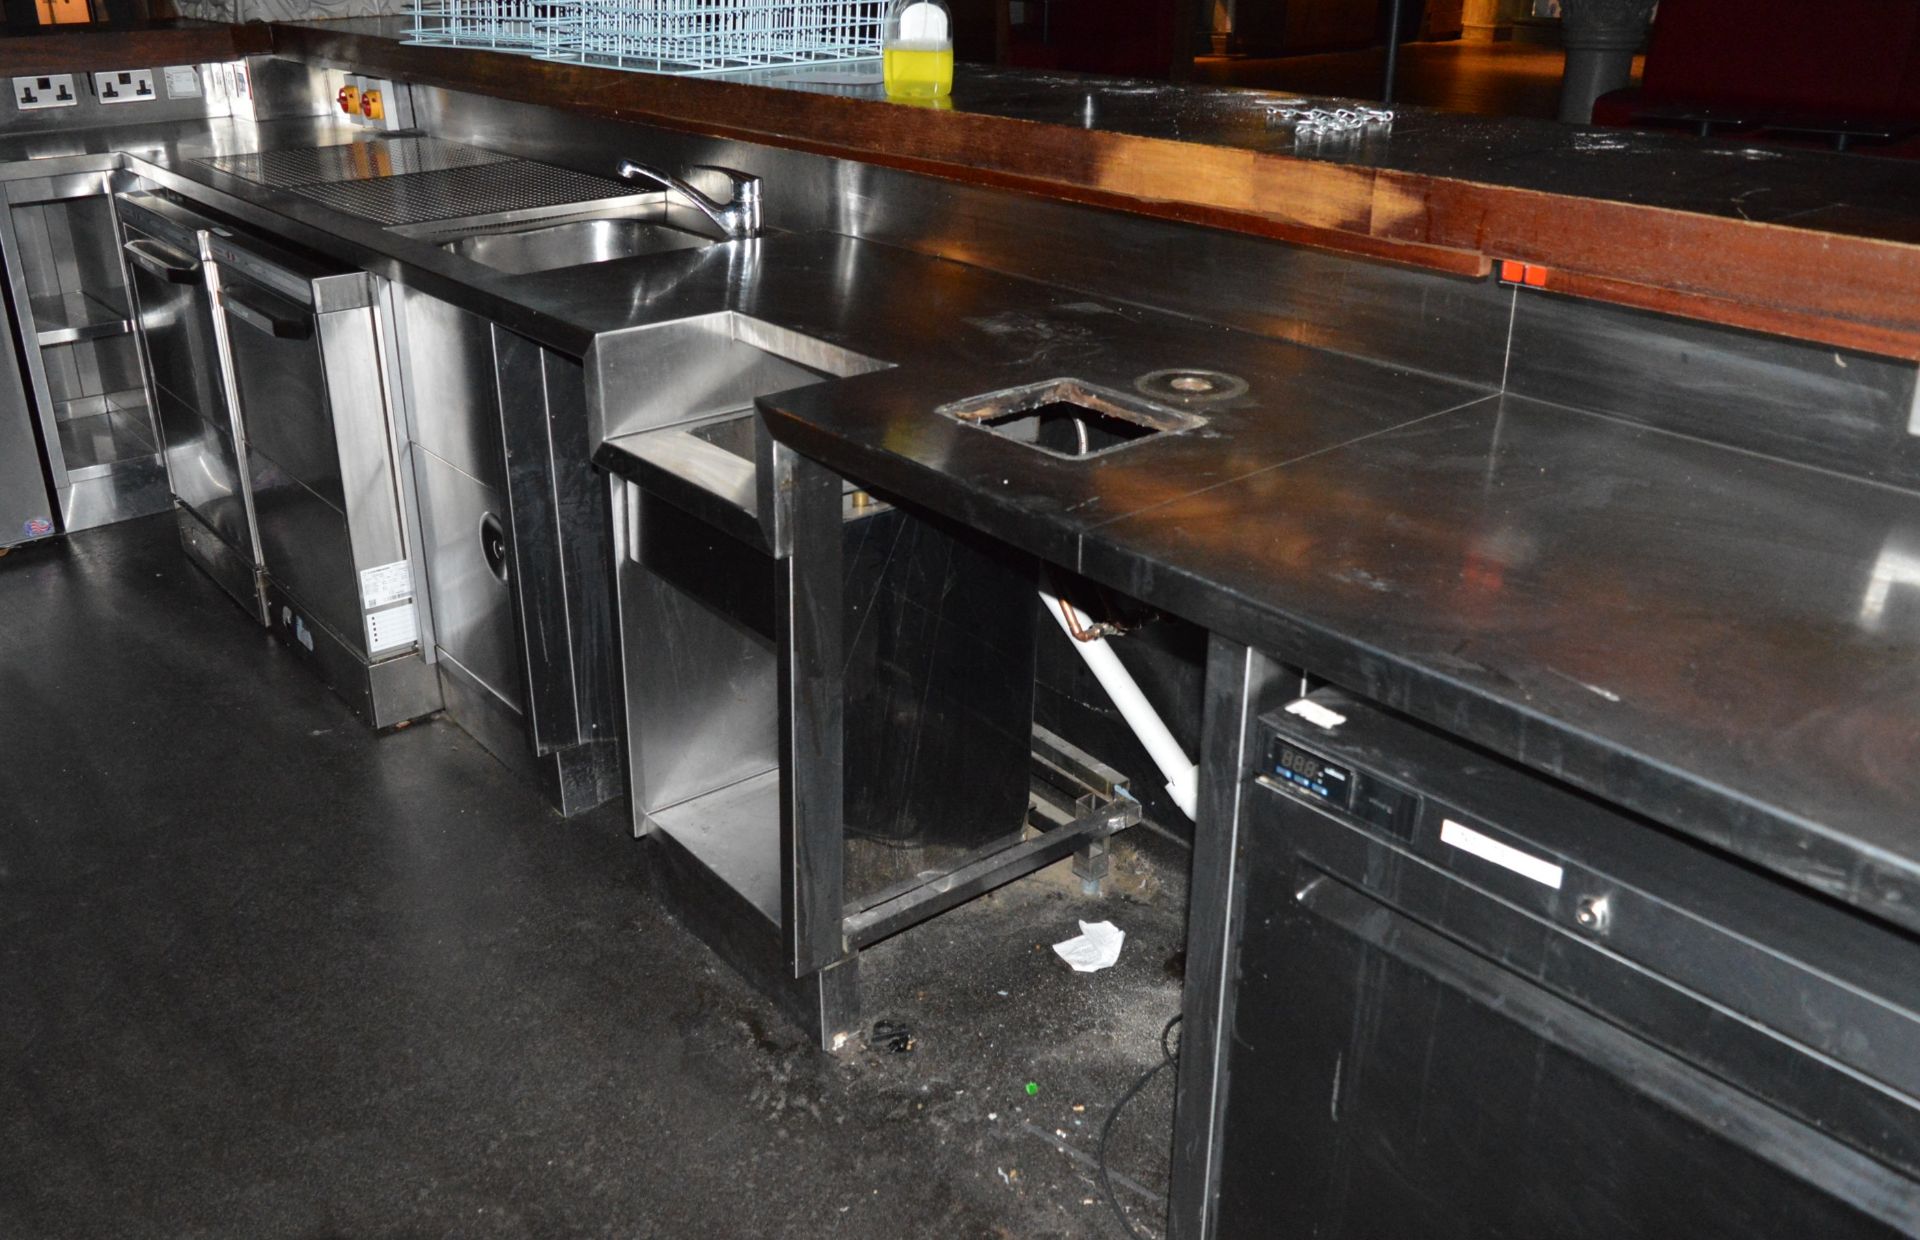 1 x Stainless Steel Bar Server Unit With Wash Basins - More Info to Follow - CL350 - Ref In2-060 - - Image 10 of 11